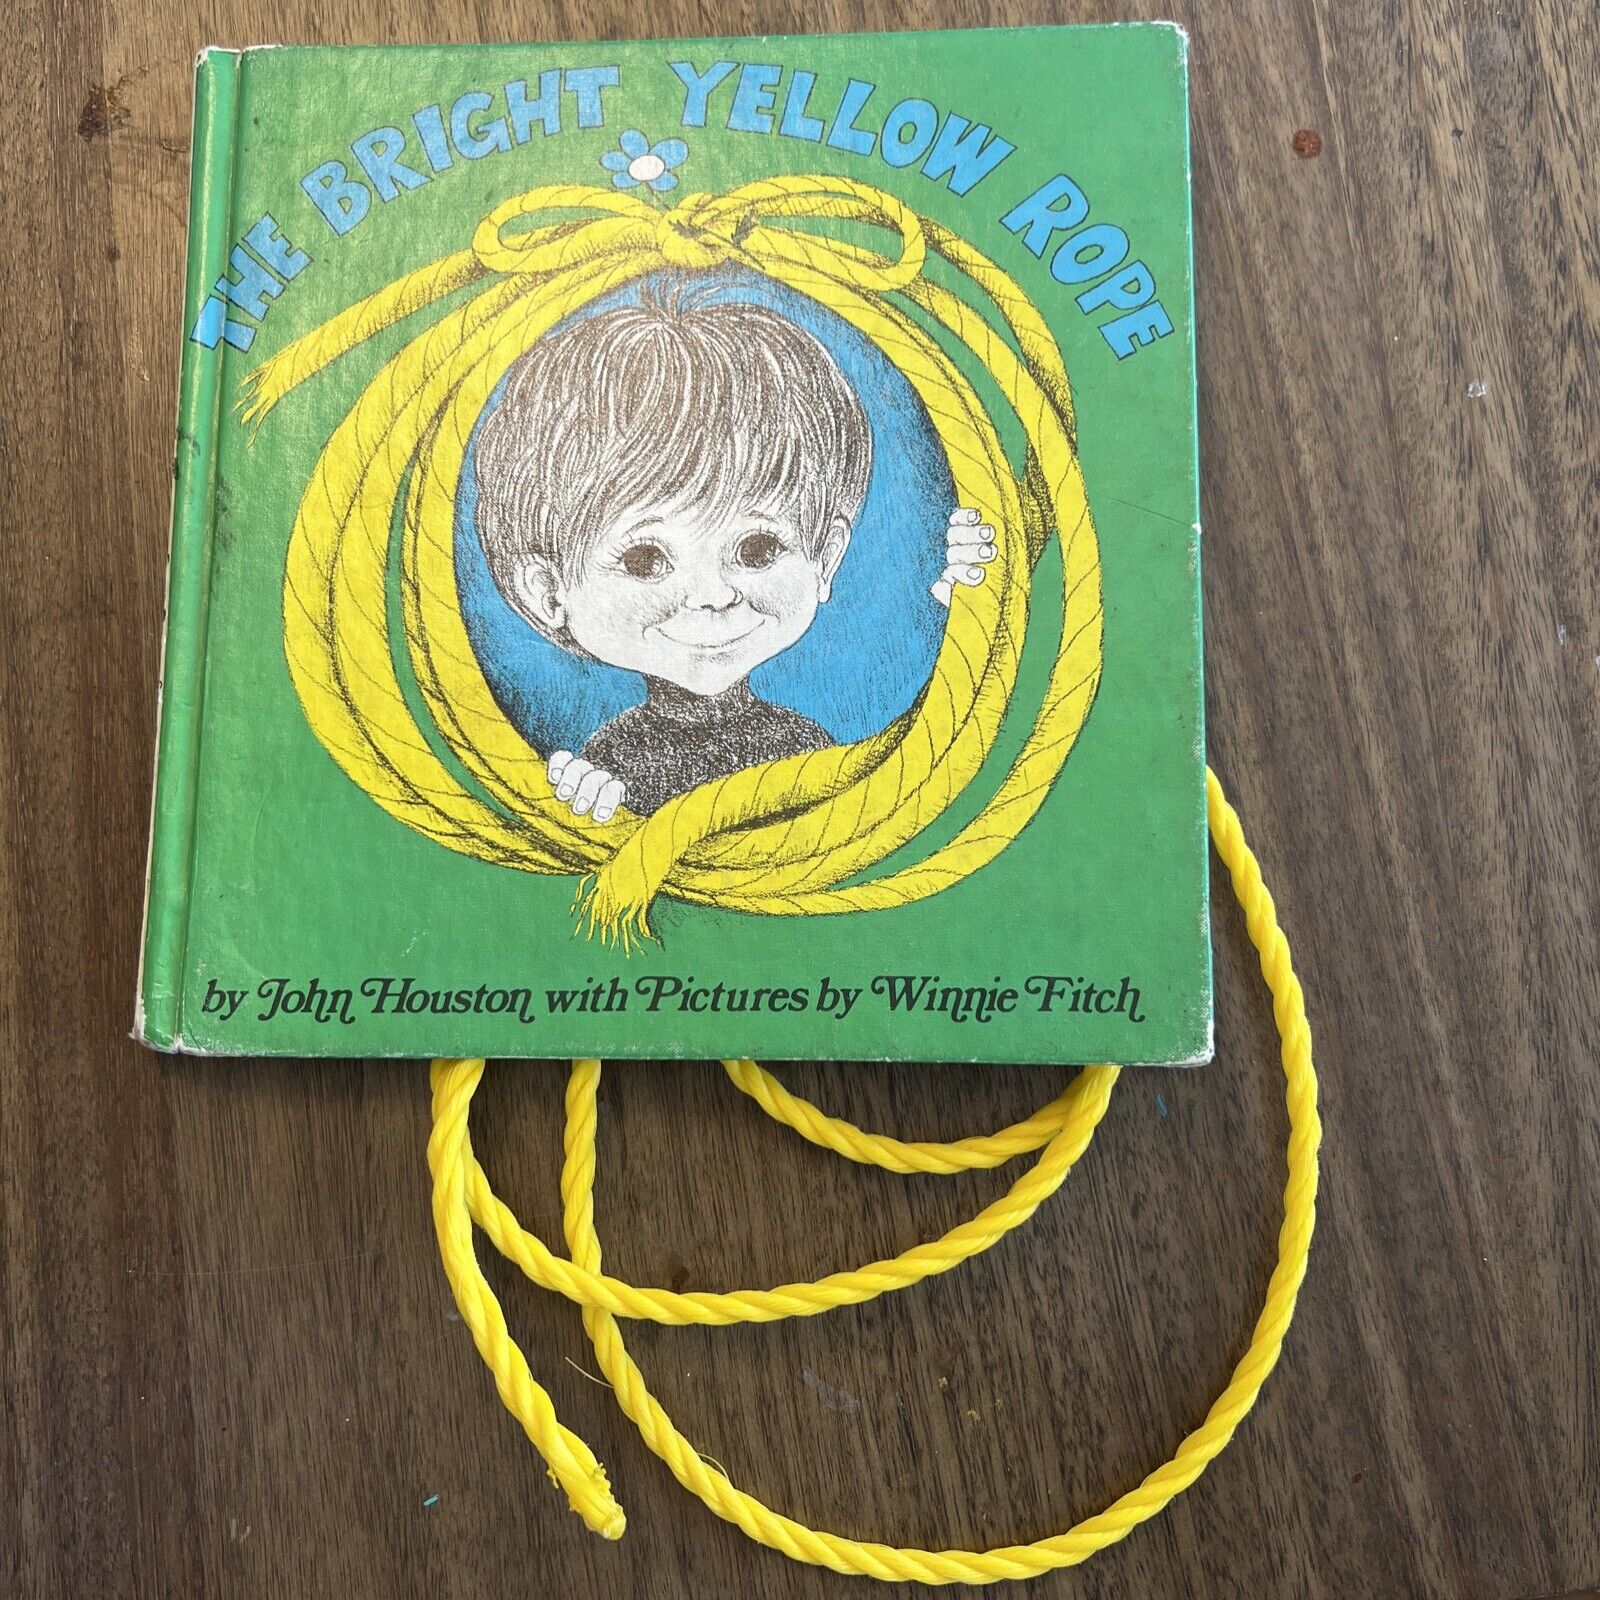 Rare The bright yellow rope -Childrens Bookhardcover. With Yellow Rope Included